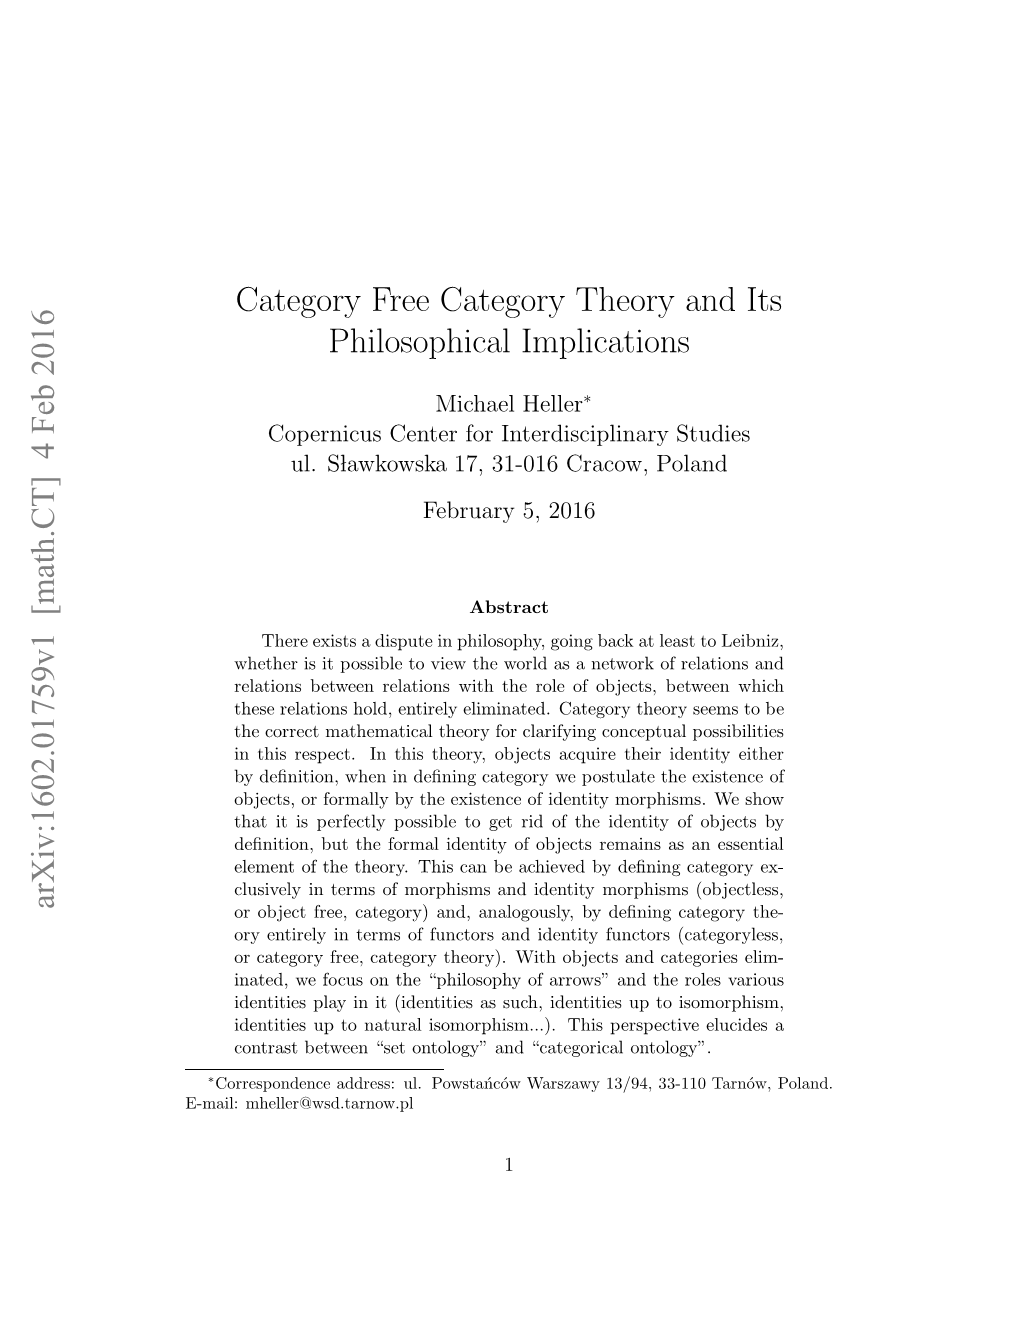 Category Free Category Theory and Its Philosophical Implications